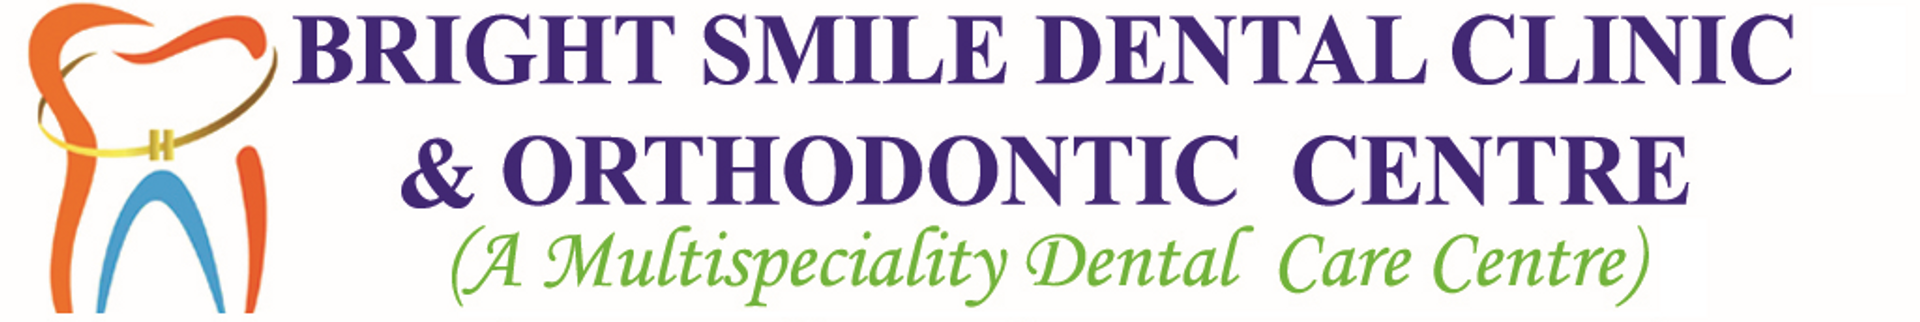 Bright Smile Dental Clinic Orthodontic and Implant Center|Dentists|Medical Services